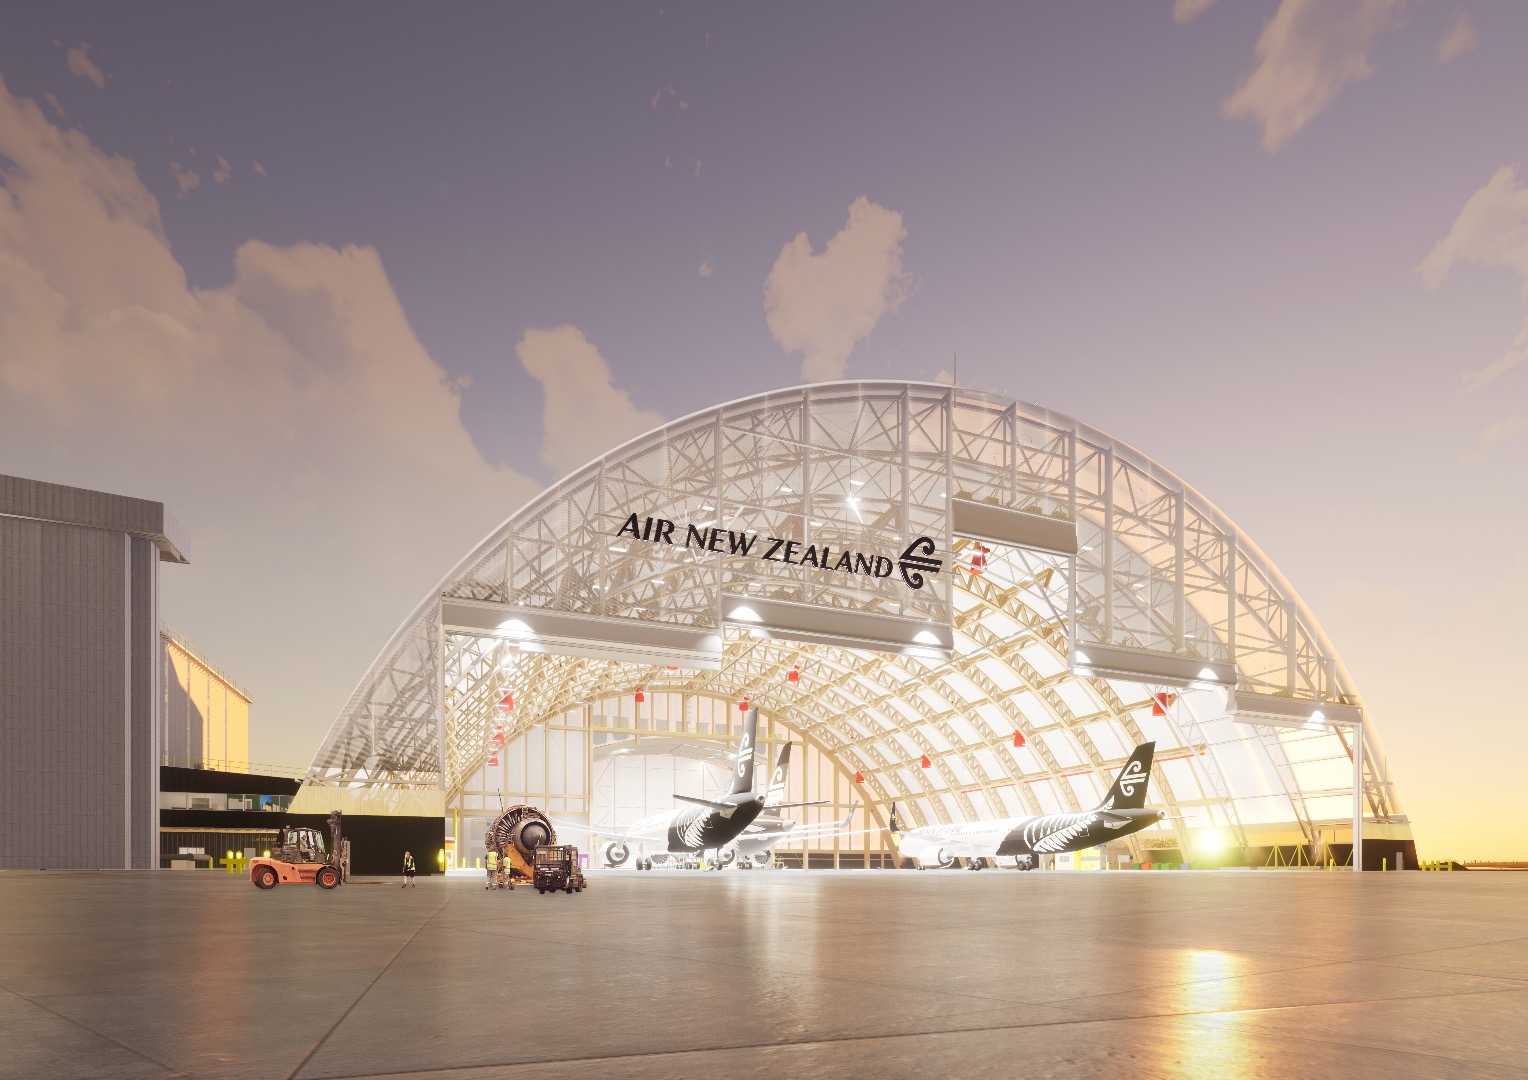 On its completion in early 2025, Air New Zealand's new flagship hangar – designed by Studio Pacific Architecture – will be the largest single-span timber arch aircraft hangar in the southern hemisphere.